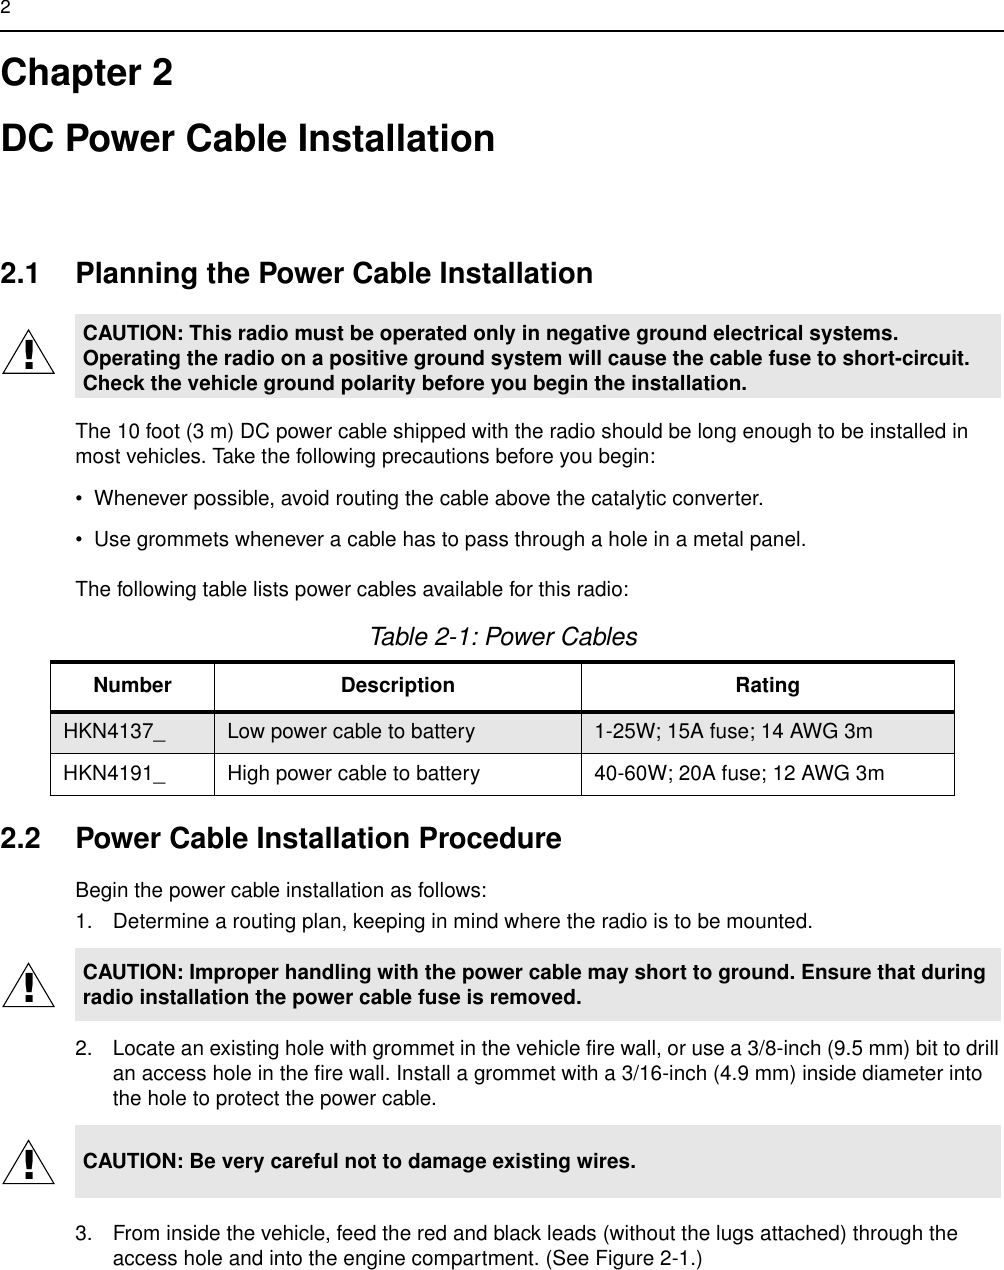 2Chapter 2DC Power Cable Installation2.1 Planning the Power Cable InstallationThe 10 foot (3 m) DC power cable shipped with the radio should be long enough to be installed in most vehicles. Take the following precautions before you begin:• Whenever possible, avoid routing the cable above the catalytic converter. • Use grommets whenever a cable has to pass through a hole in a metal panel. The following table lists power cables available for this radio:2.2 Power Cable Installation ProcedureBegin the power cable installation as follows:1. Determine a routing plan, keeping in mind where the radio is to be mounted.2. Locate an existing hole with grommet in the vehicle fire wall, or use a 3/8-inch (9.5 mm) bit to drill an access hole in the fire wall. Install a grommet with a 3/16-inch (4.9 mm) inside diameter into the hole to protect the power cable.3. From inside the vehicle, feed the red and black leads (without the lugs attached) through the access hole and into the engine compartment. (See Figure 2-1.)CAUTION: This radio must be operated only in negative ground electrical systems. Operating the radio on a positive ground system will cause the cable fuse to short-circuit. Check the vehicle ground polarity before you begin the installation.Table 2-1: Power CablesNumber Description RatingHKN4137_ Low power cable to battery 1-25W; 15A fuse; 14 AWG 3m HKN4191_ High power cable to battery 40-60W; 20A fuse; 12 AWG 3mCAUTION: Improper handling with the power cable may short to ground. Ensure that during radio installation the power cable fuse is removed.CAUTION: Be very careful not to damage existing wires.!!!